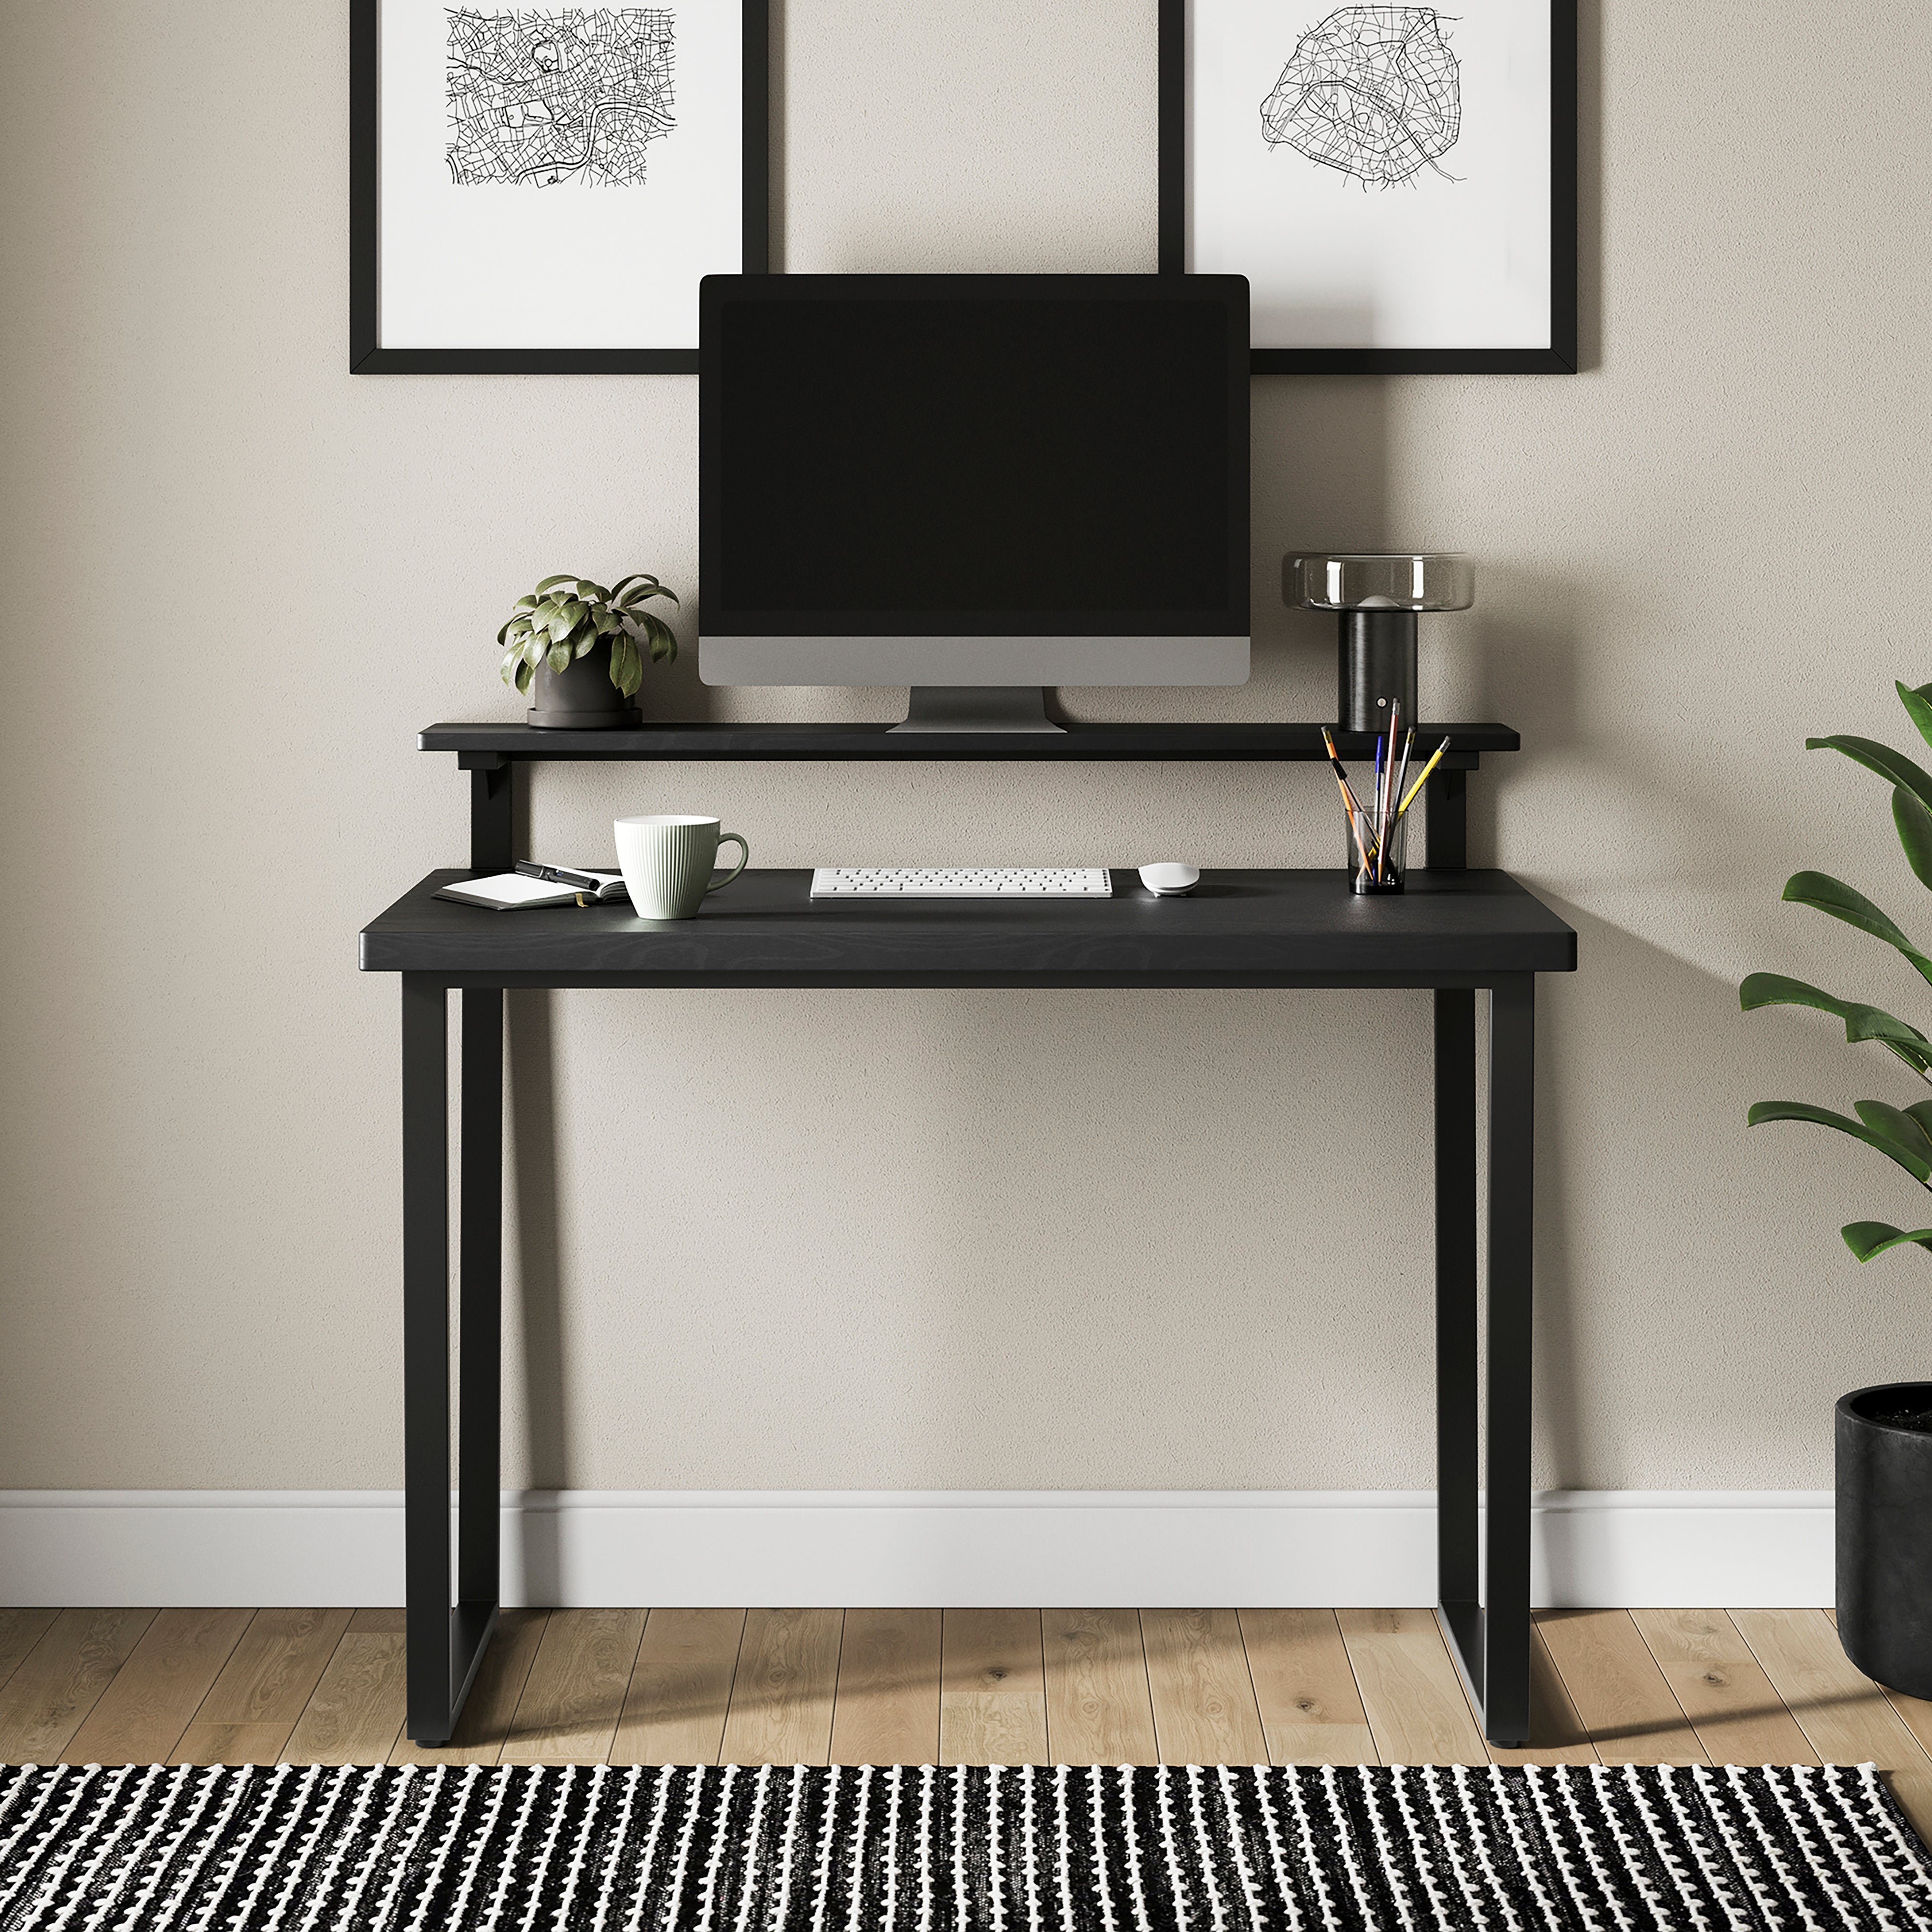 Charcoal Black Small Computer Desk for Bedroom, Office & Small Spaces - Narrow Writing Desk Ideal for Students, Kids, Adults - Modern Design Compact M